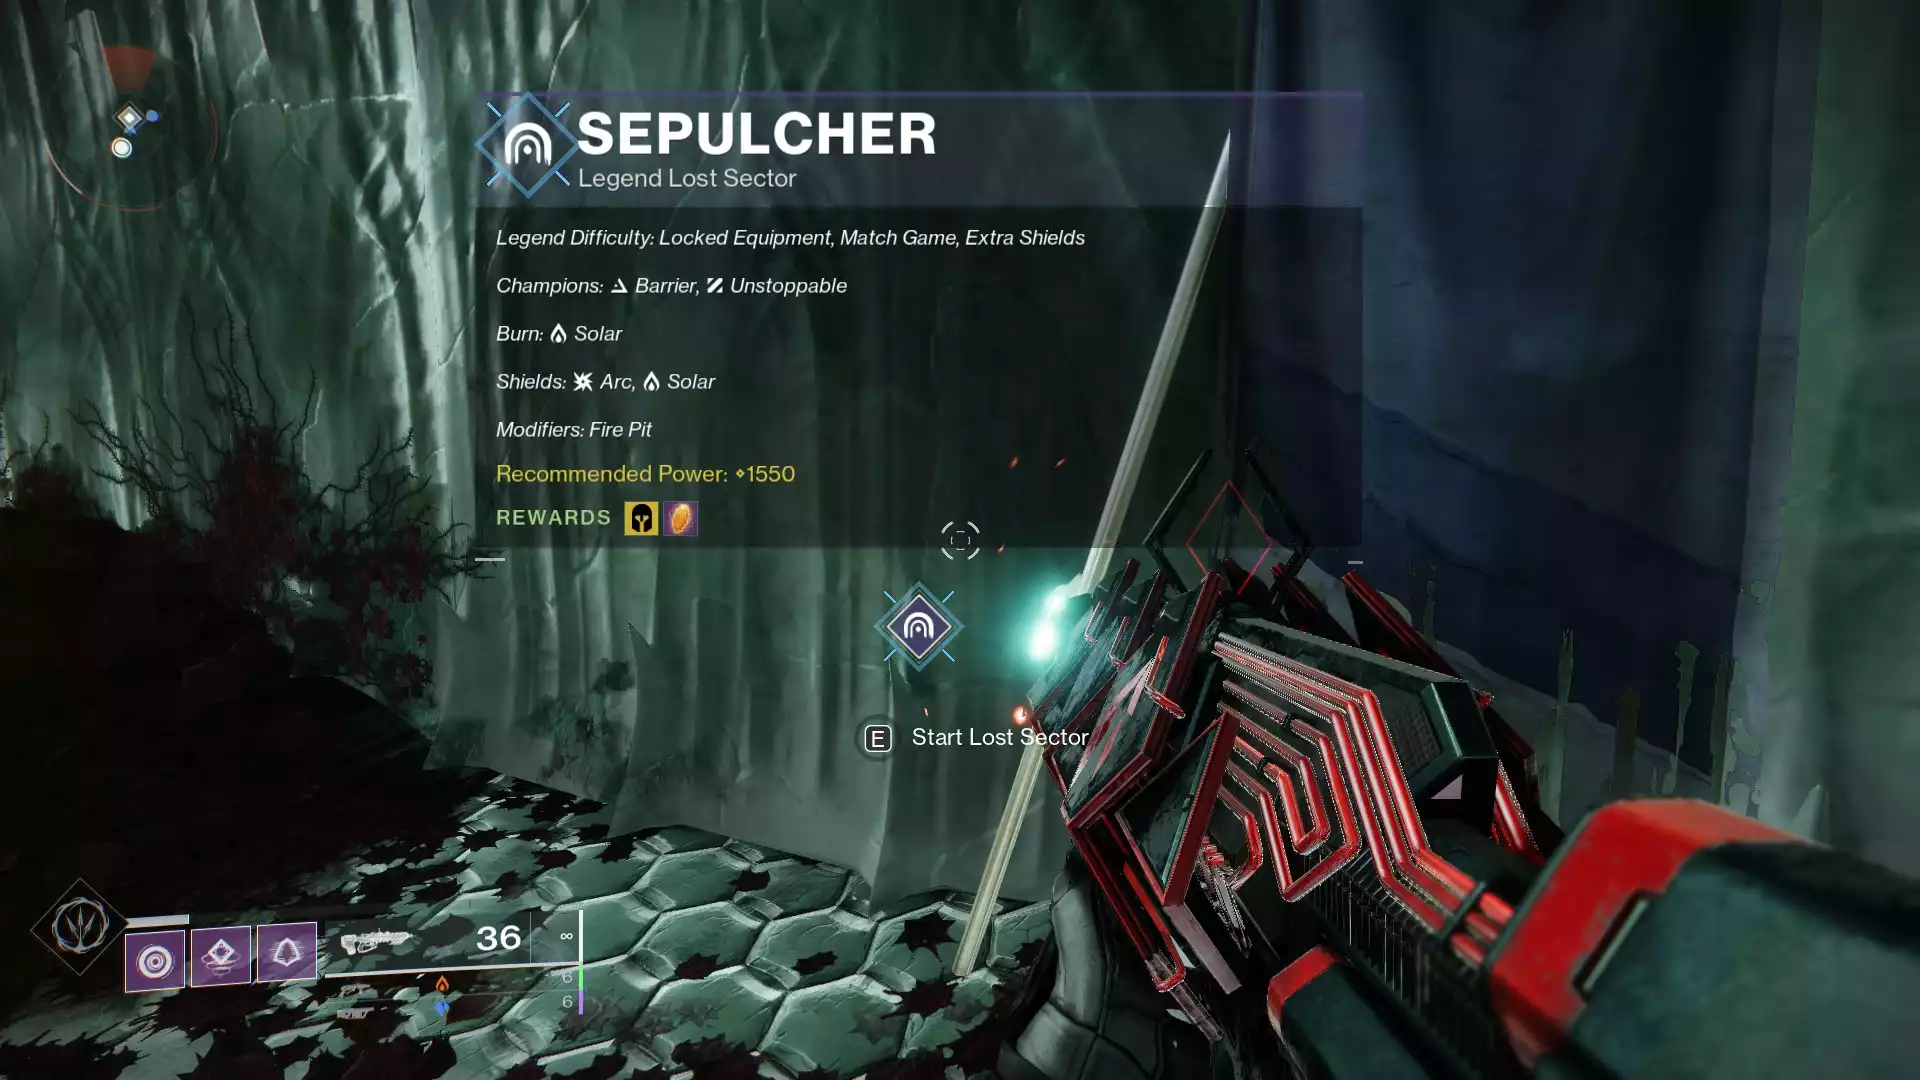 Destiny 2 Sepulcher: How To Complete The Master/Legend Lost Sector